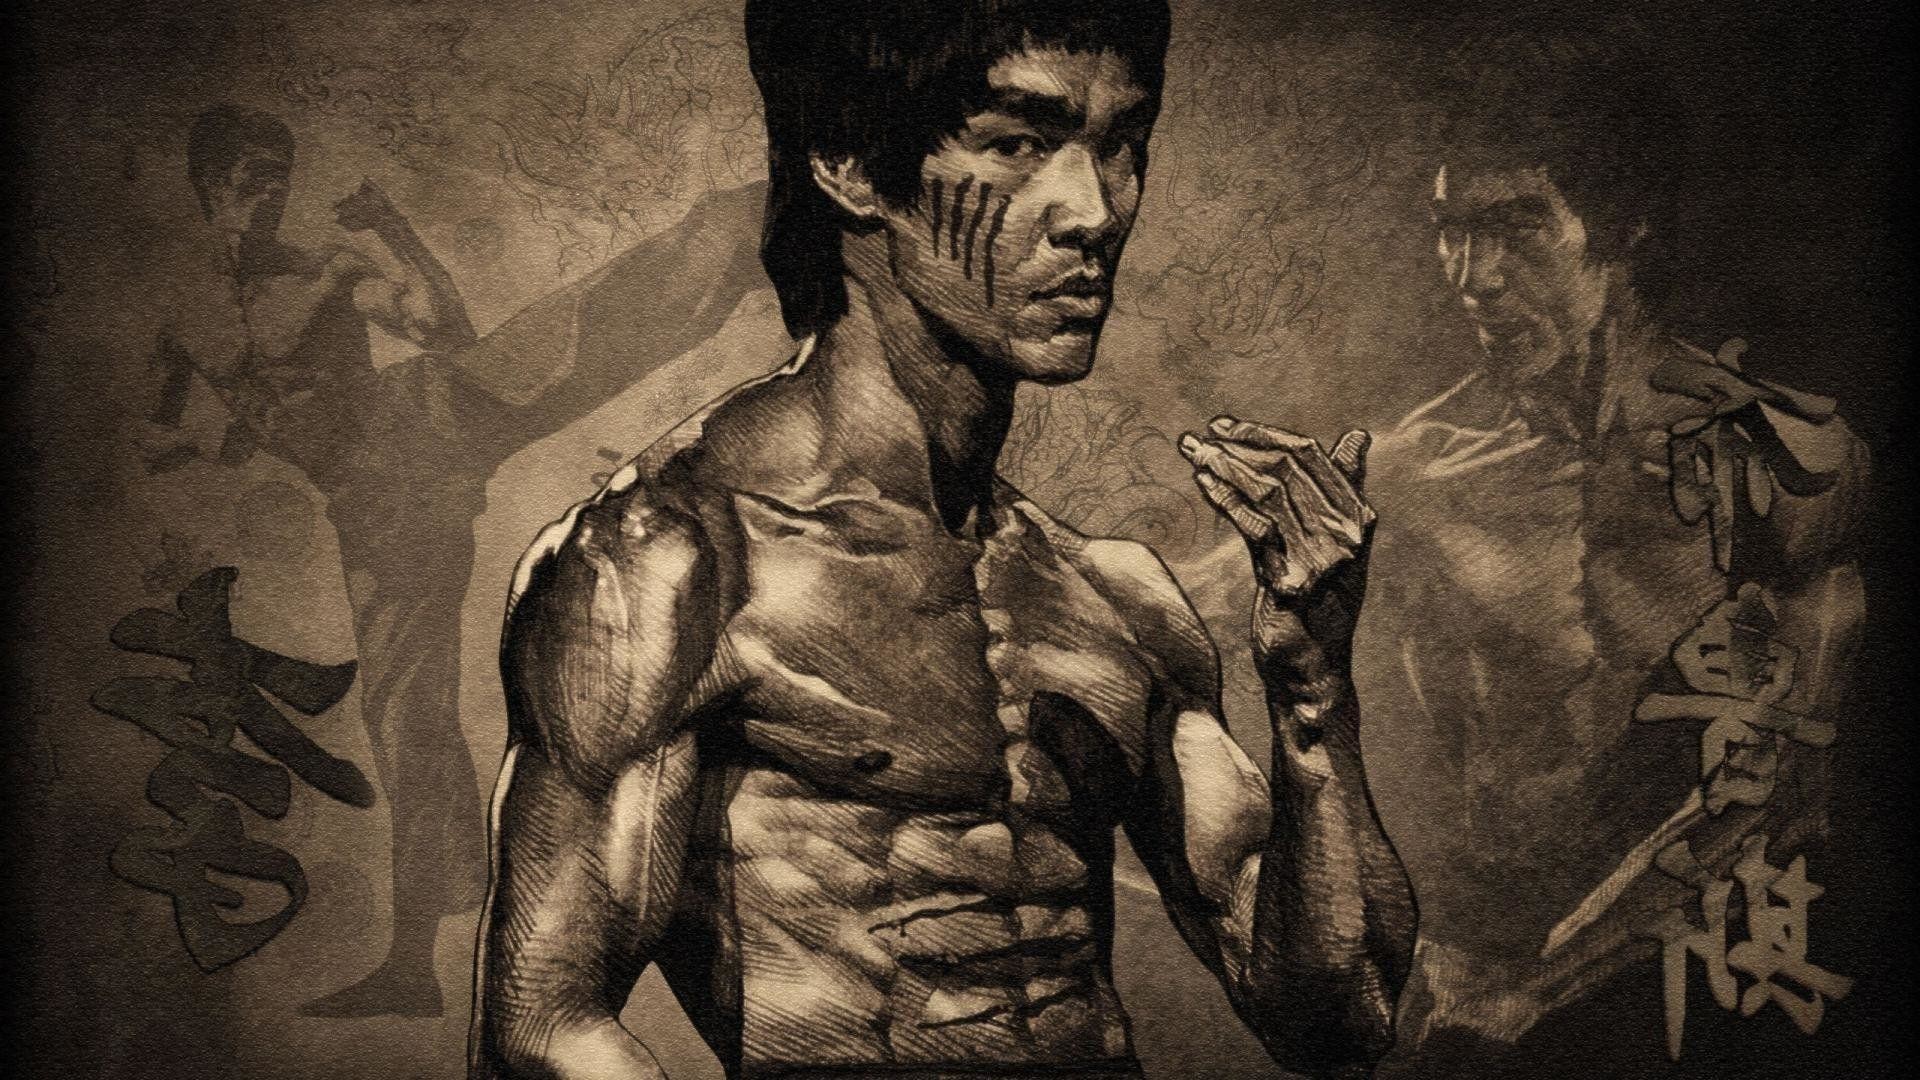 Bruce Lee Wallpapers (74+ pictures)